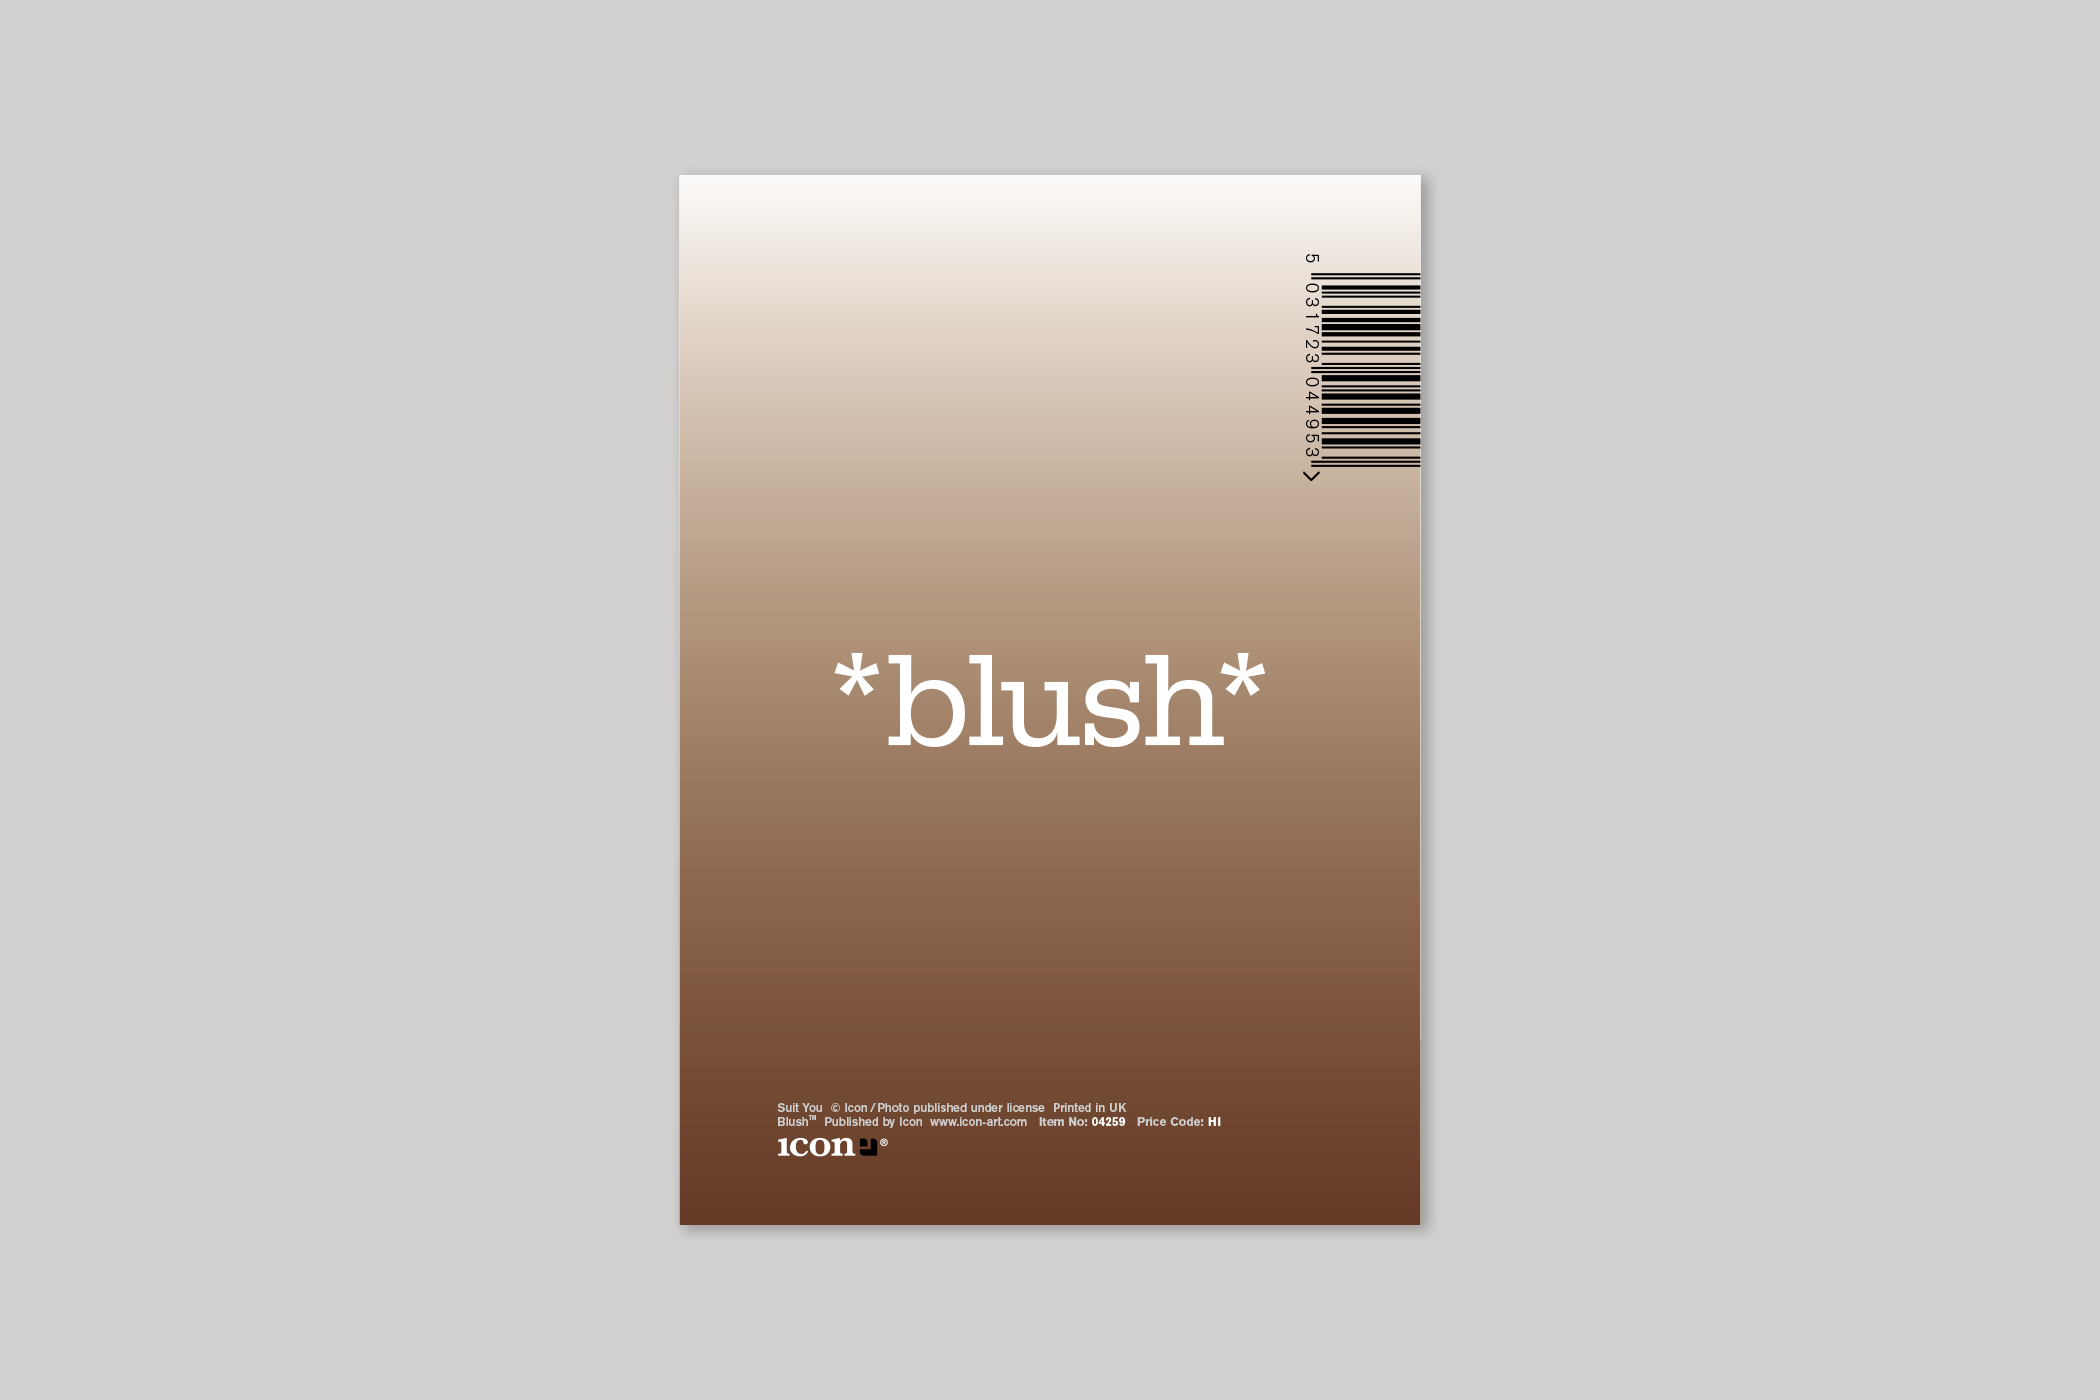 Suit You from Blush humour range of greeting cards by Icon, with envelope.